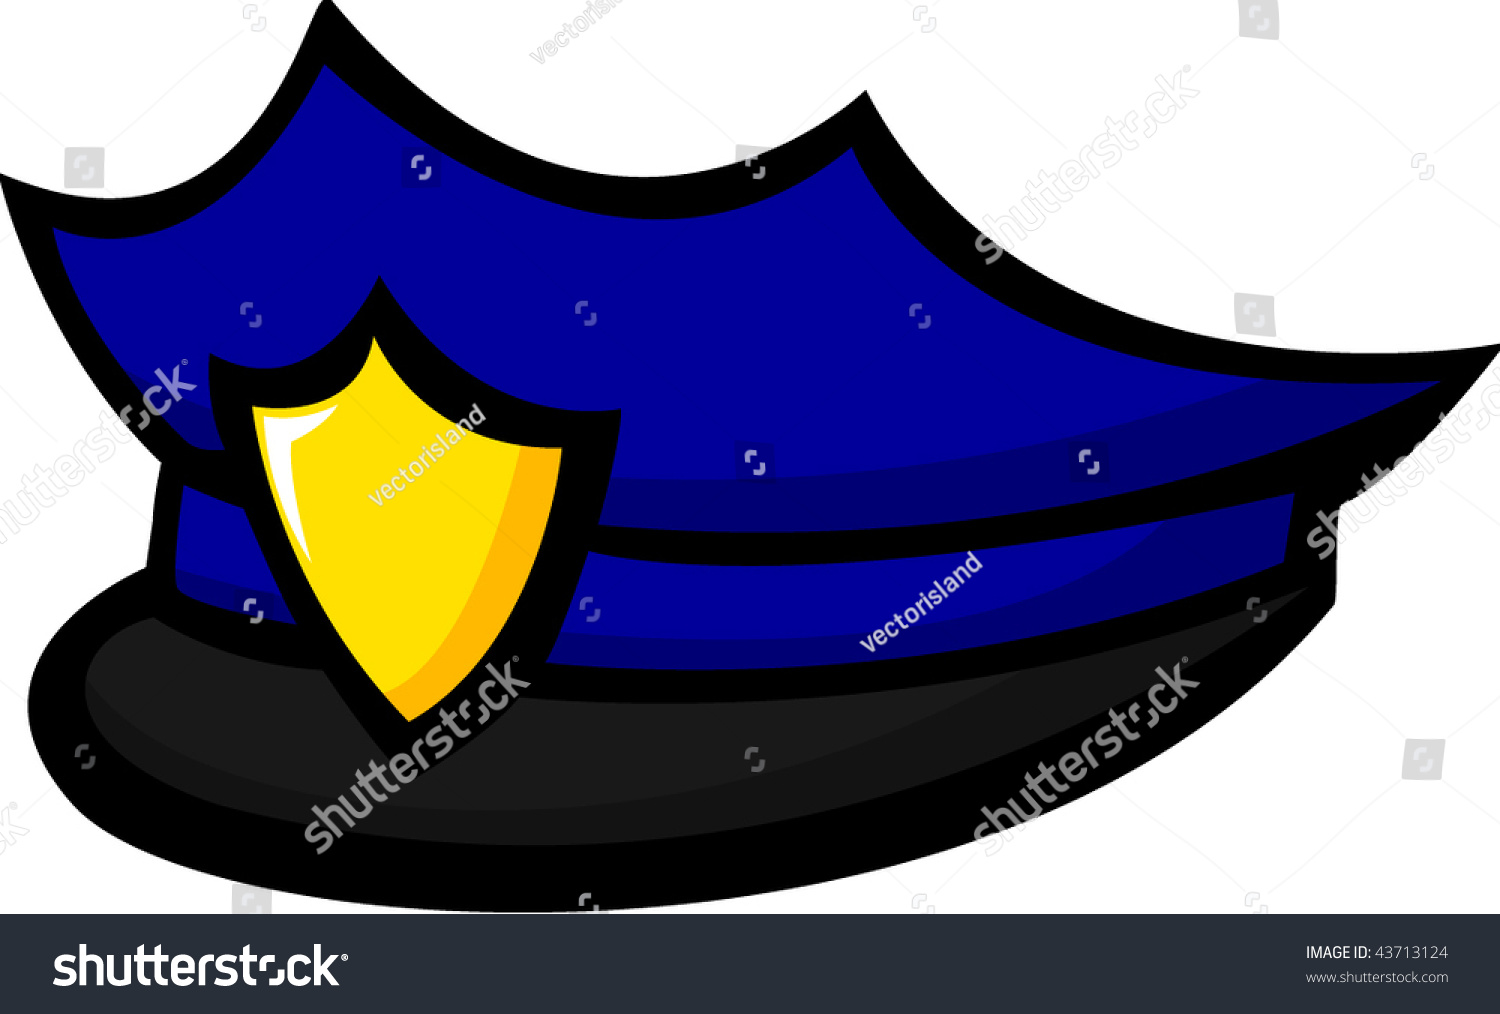 police officer hat clipart - photo #27